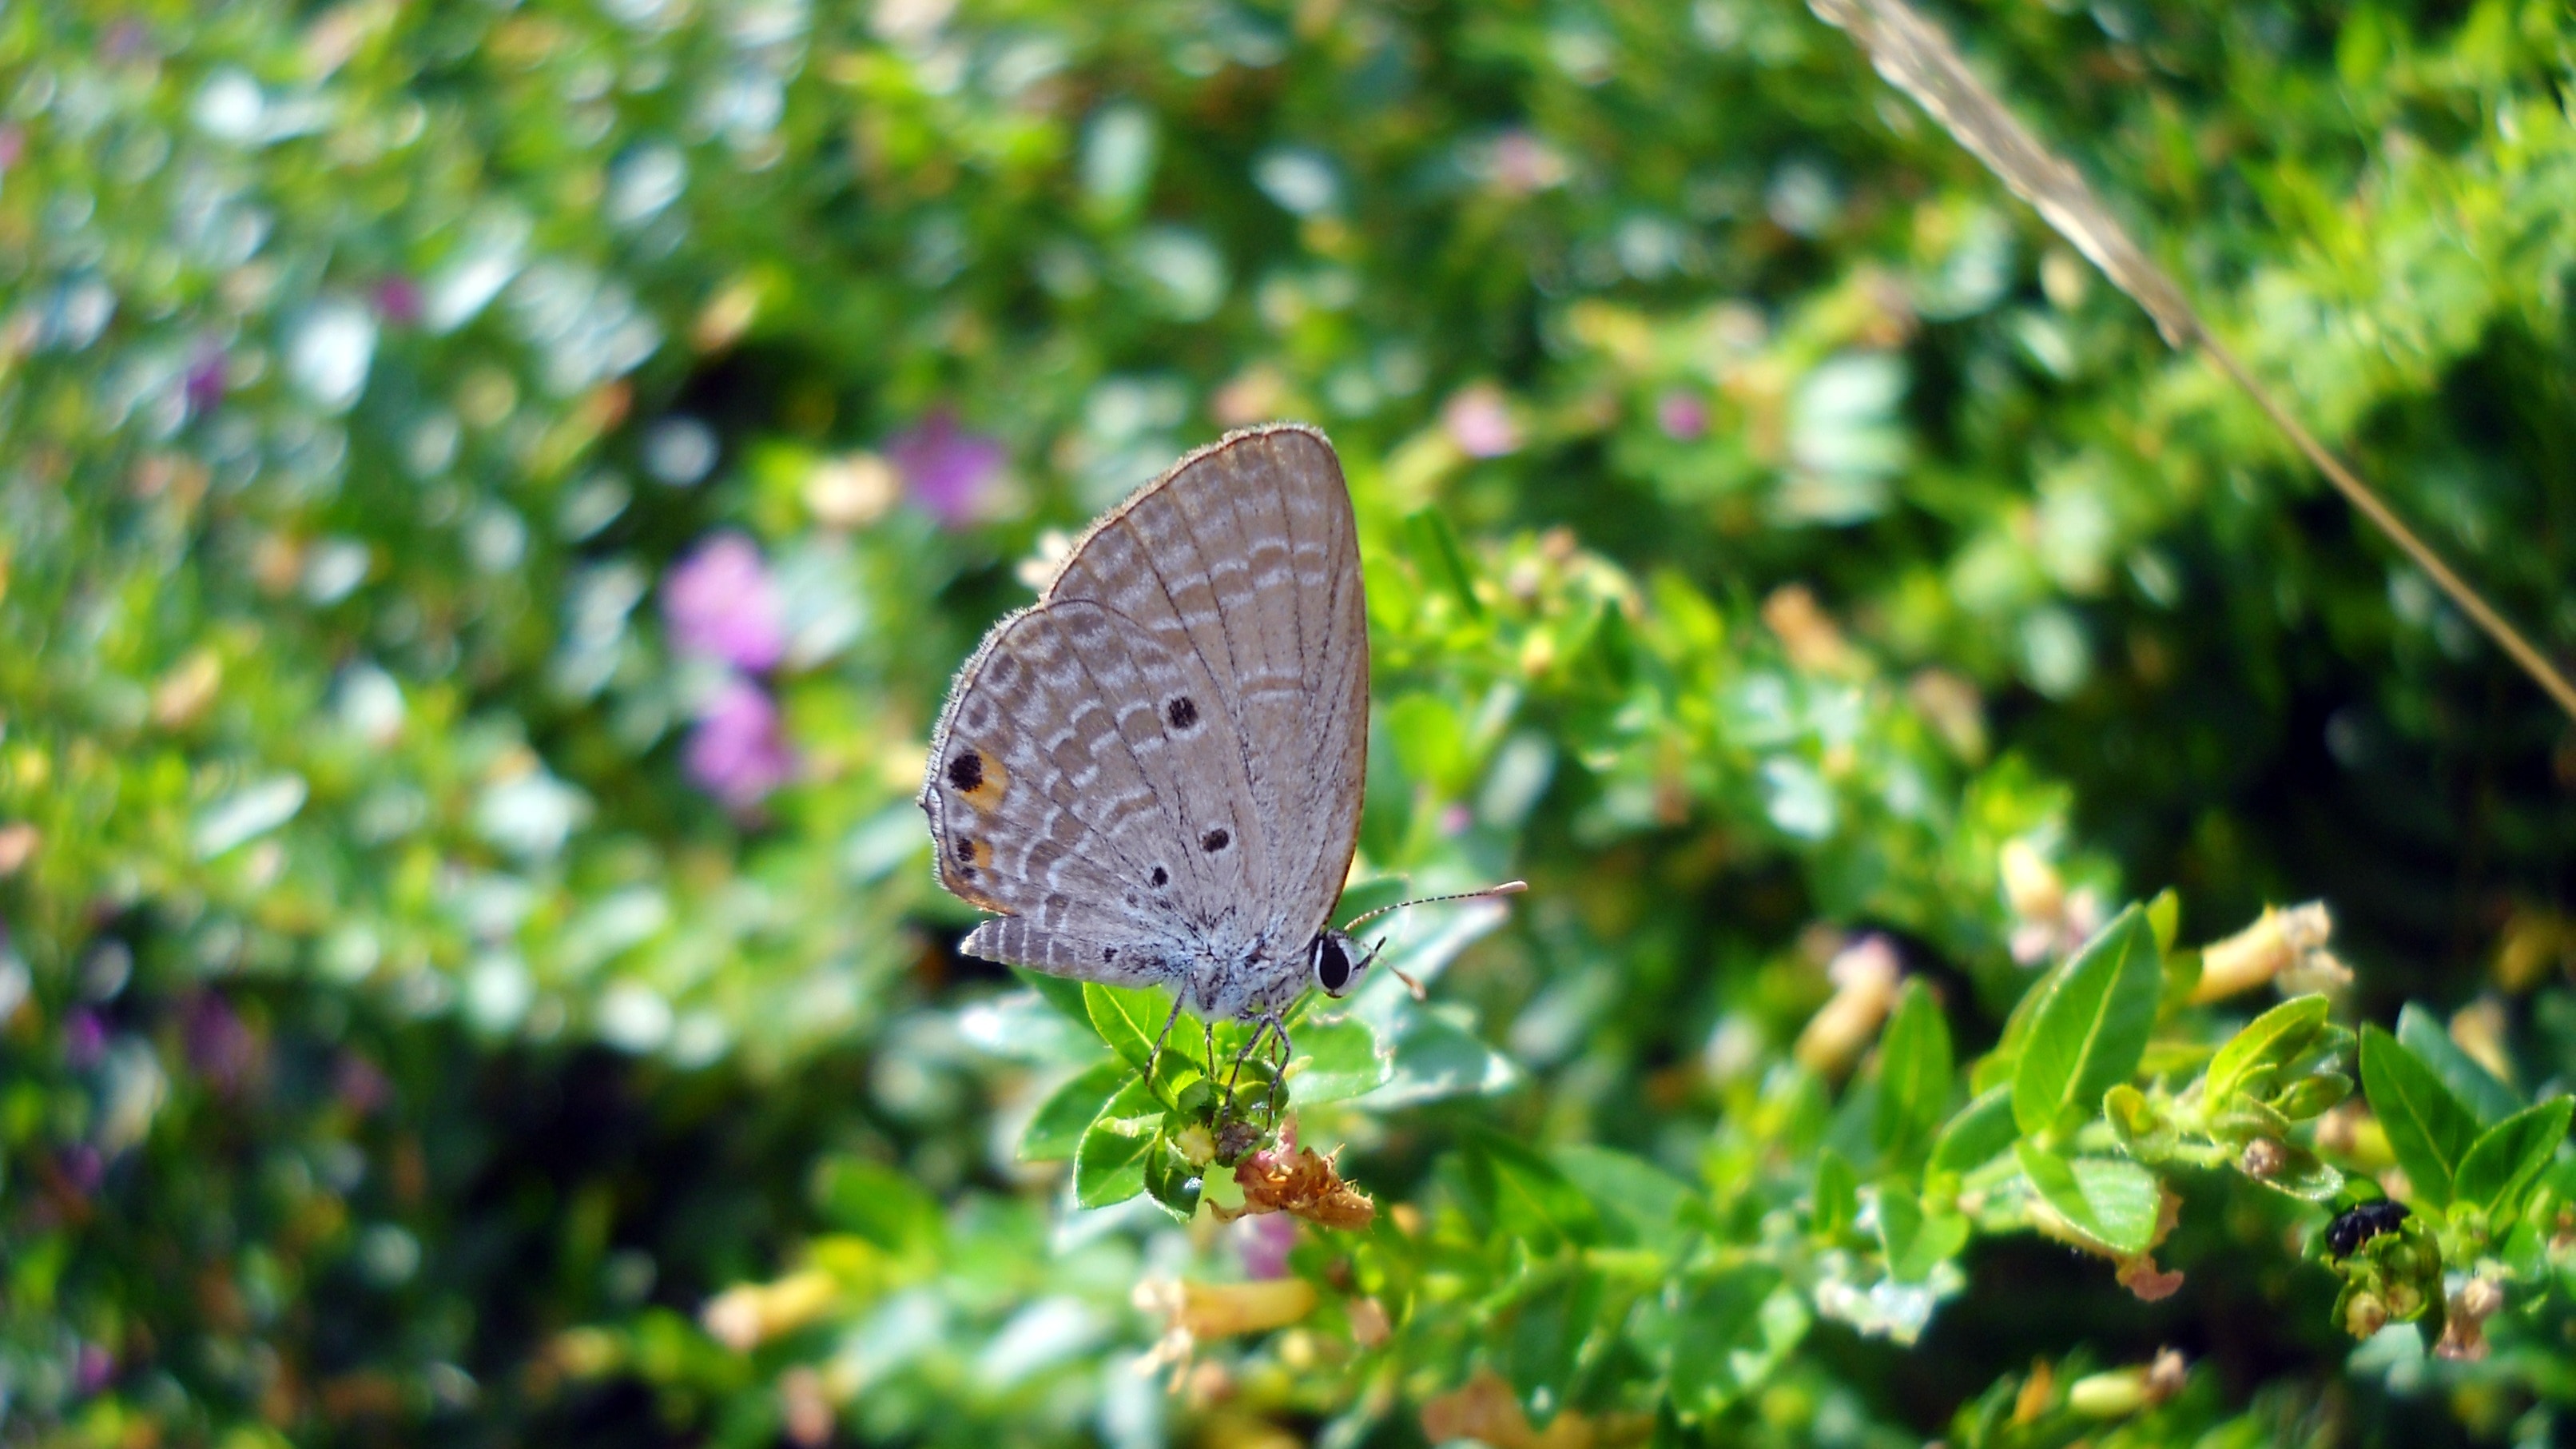 silver studded blue butterfly on green plant leaves